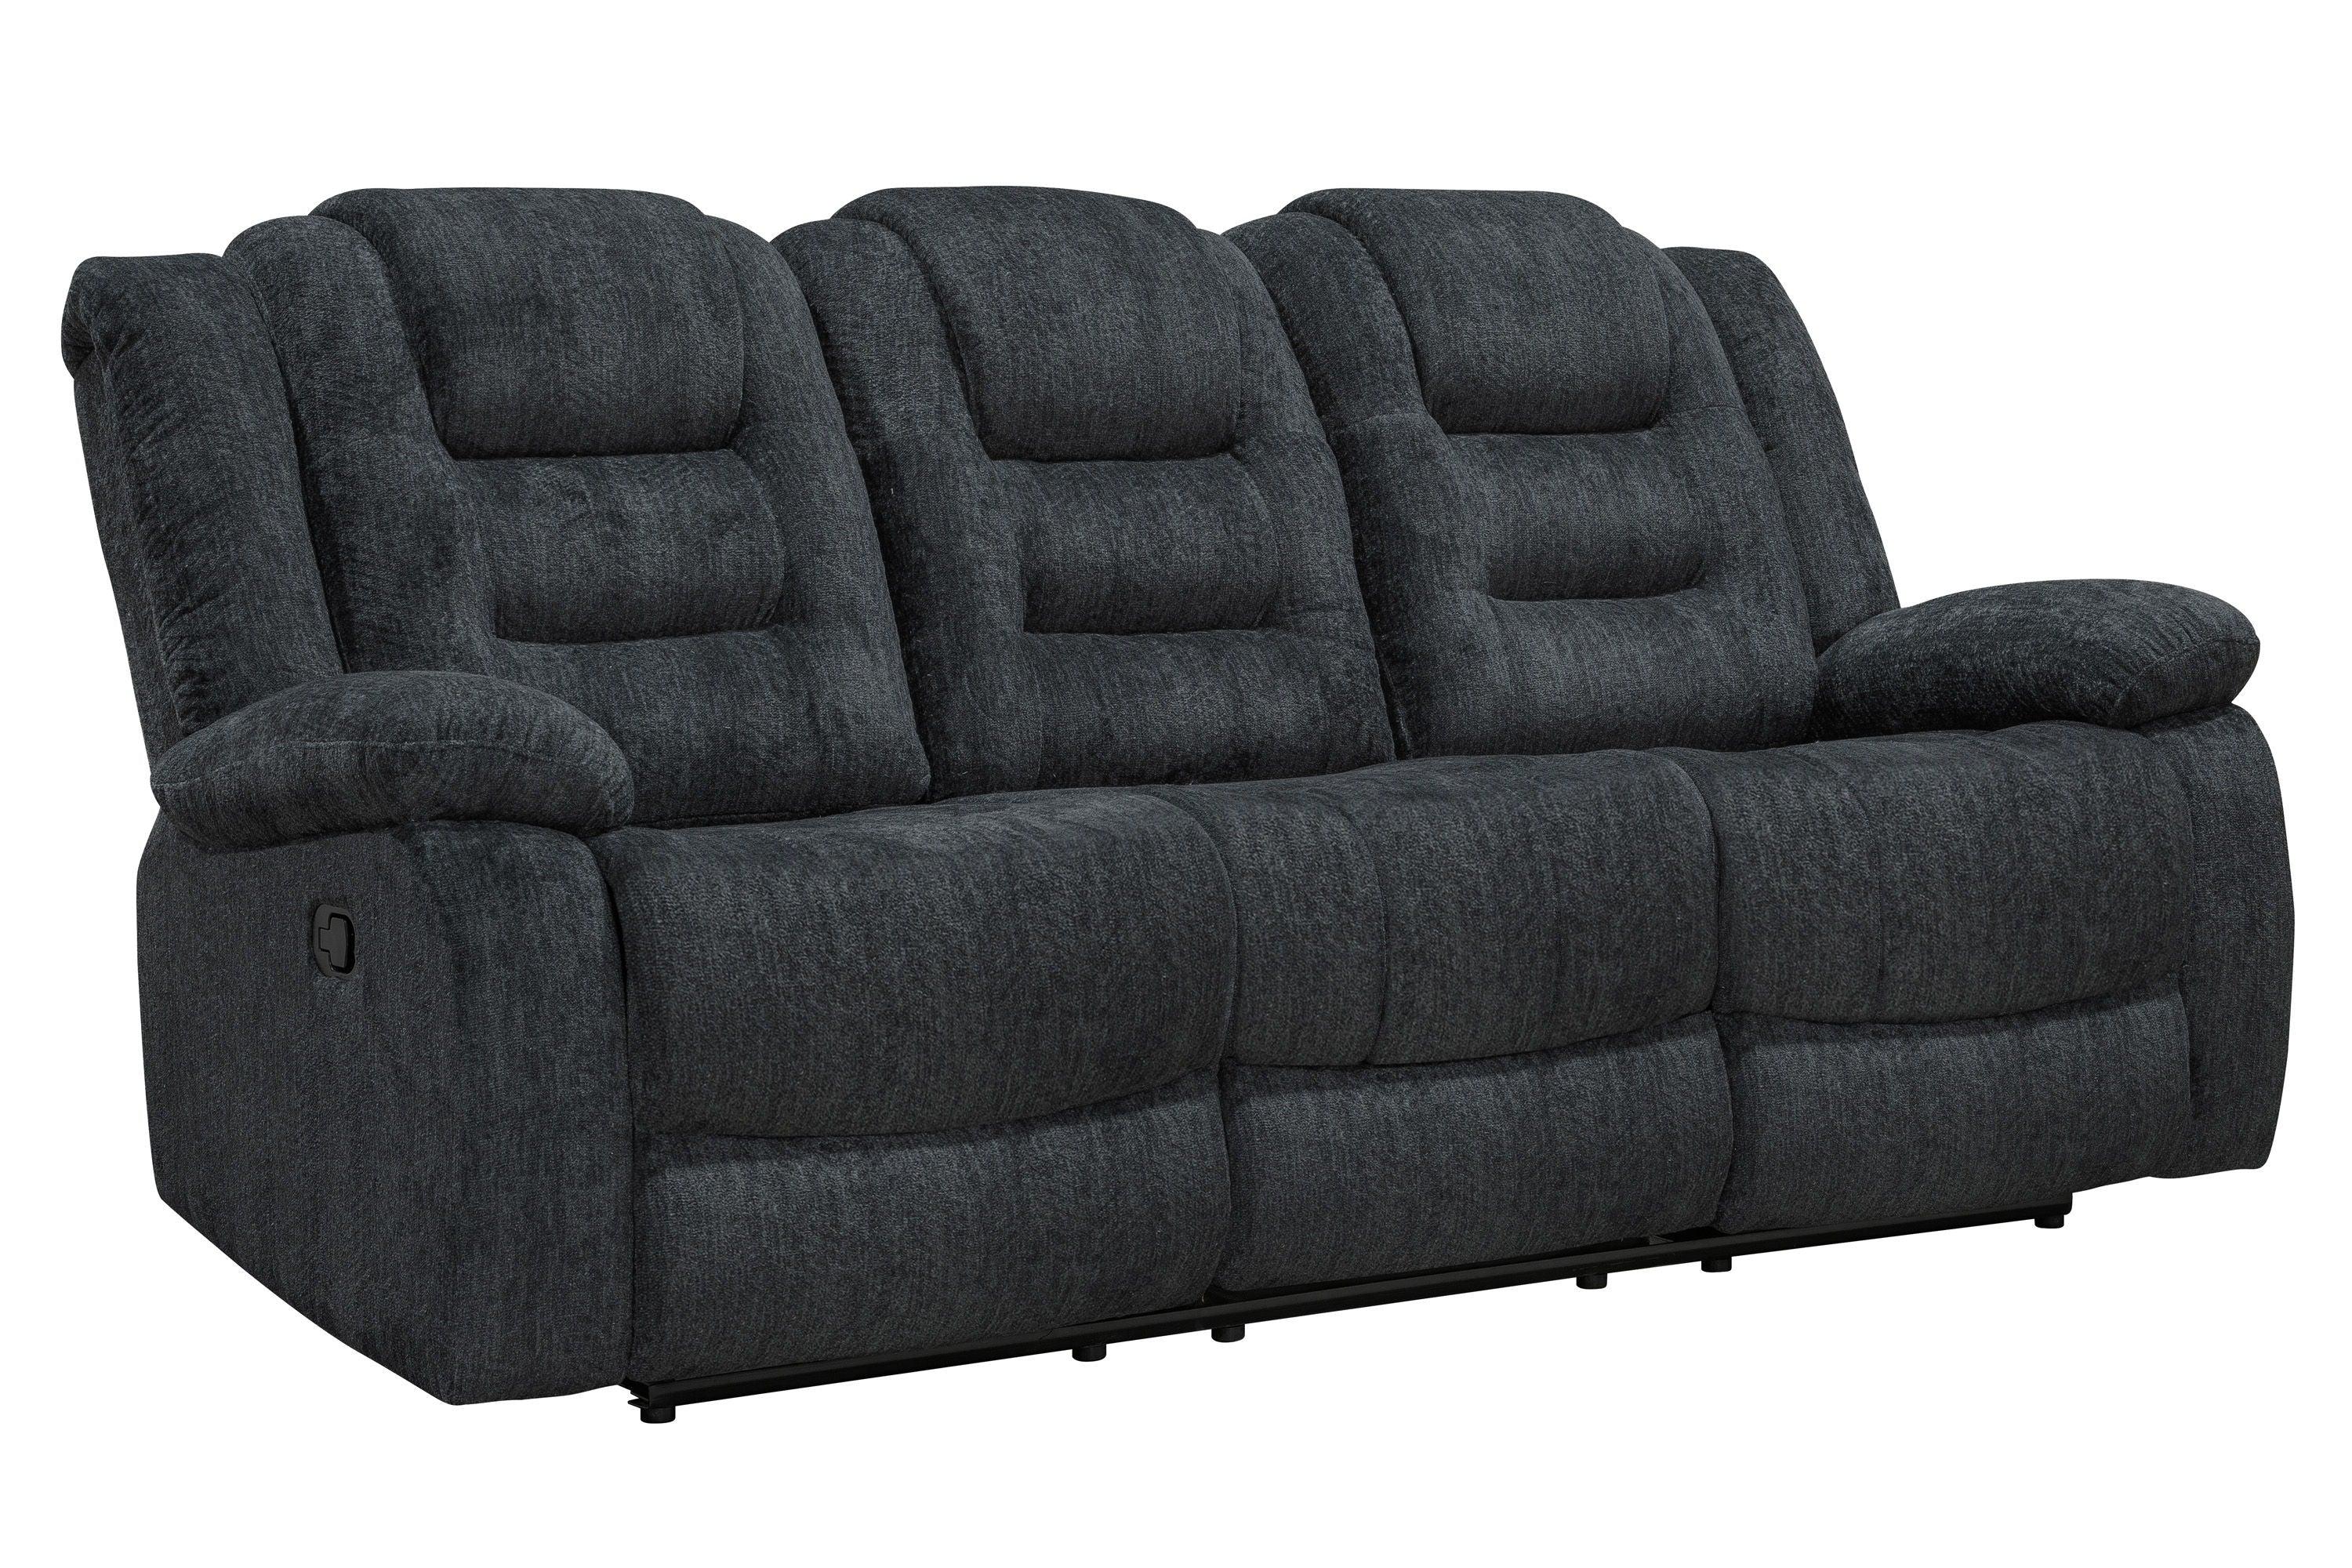 Parker Living - Bolton - Reclining Dual Reclining Sofa - Misty Storm - 5th Avenue Furniture